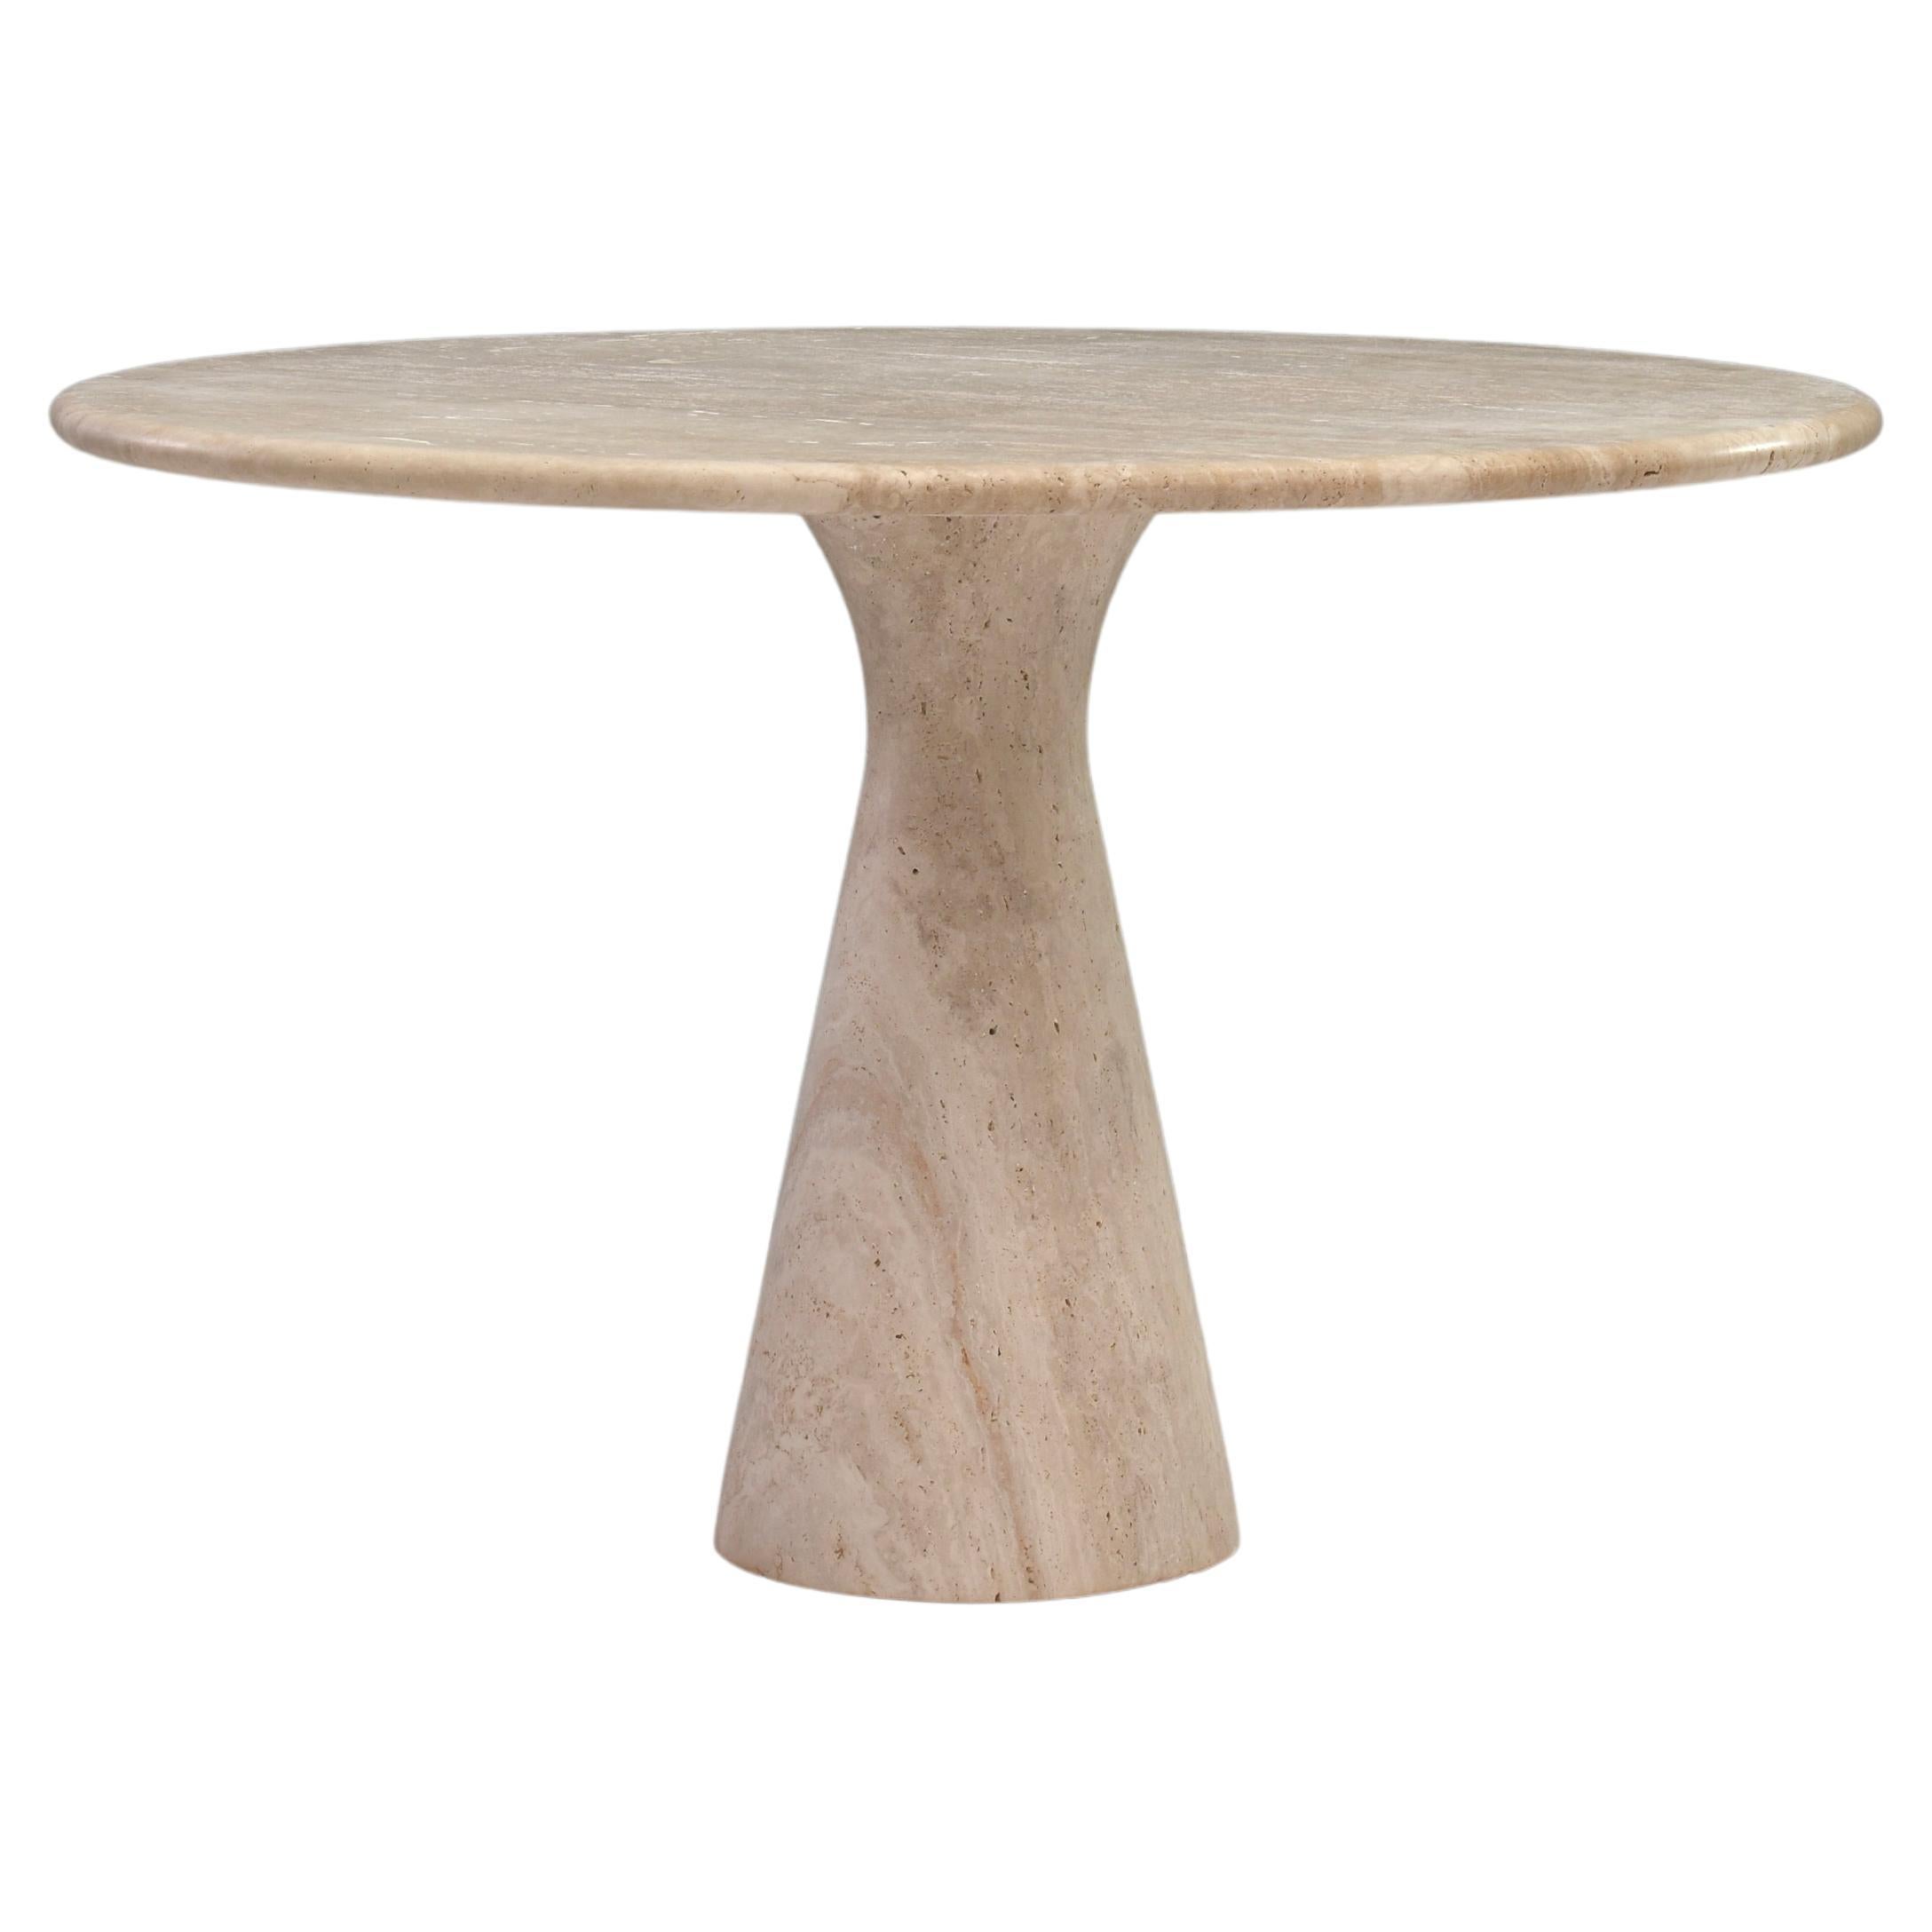 Exquisite Round Travertine Dining Table in the manor of Angelo Mangiarotti/Up&Up For Sale